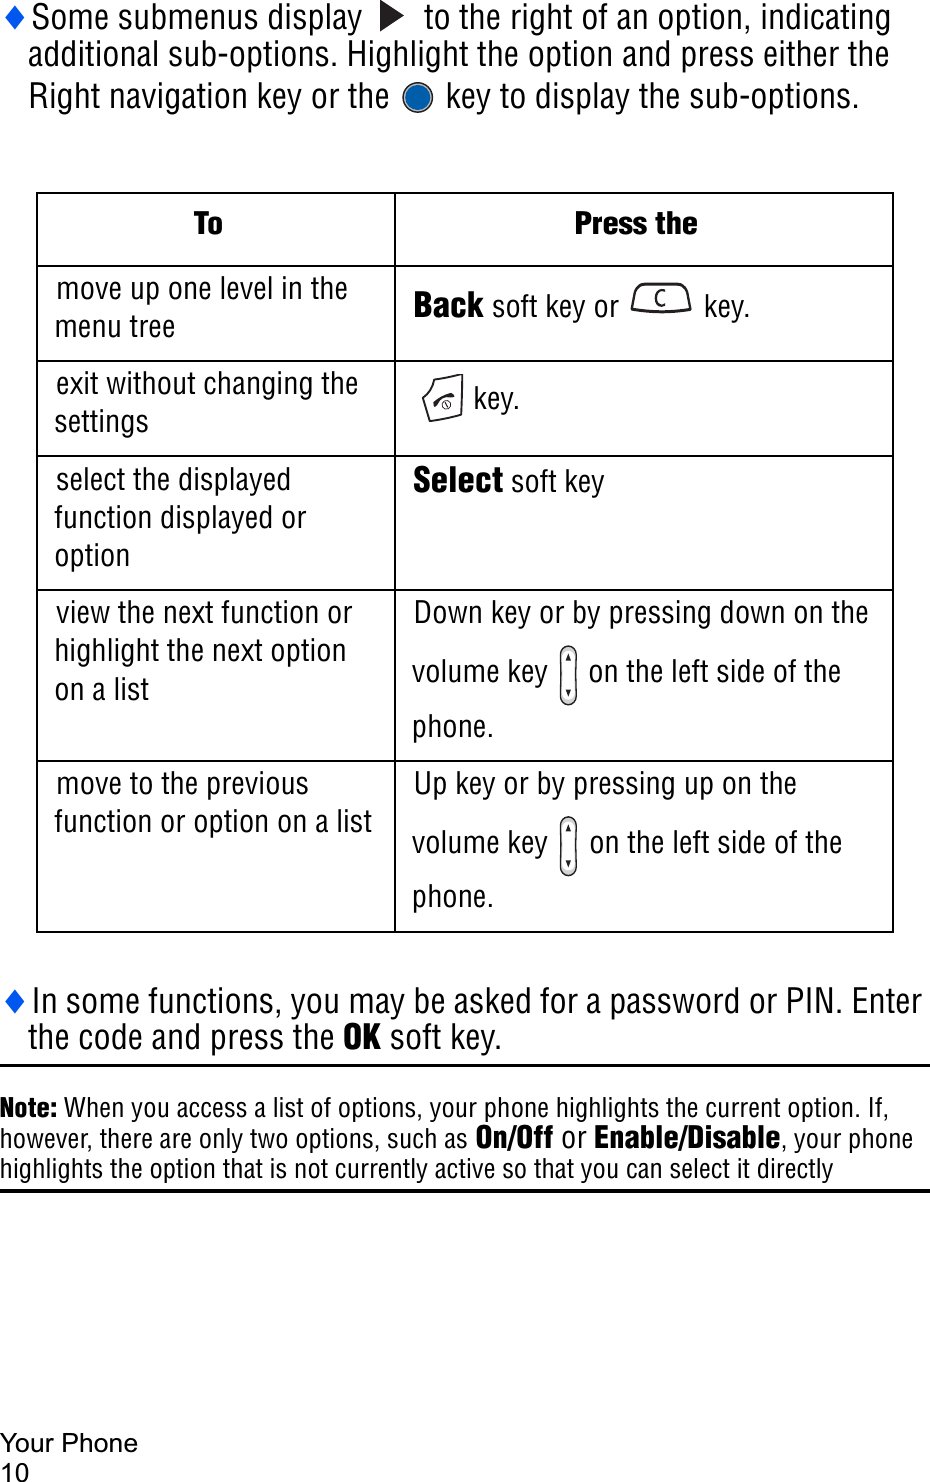 Your Phone10iSome submenus display   to the right of an option, indicating additional sub-options. Highlight the option and press either the Right navigation key or the   key to display the sub-options.iIn some functions, you may be asked for a password or PIN. Enter the code and press the OK soft key.Note: When you access a list of options, your phone highlights the current option. If, however, there are only two options, such as On/Off or Enable/Disable, your phone highlights the option that is not currently active so that you can select it directlyTo Press themove up one level in the menu tree Back soft key or  key.exit without changing the settings  key.select the displayed function displayed or optionSelect soft keyview the next function or highlight the next option on a listDown key or by pressing down on the volume key   on the left side of the phone. move to the previous function or option on a listUp key or by pressing up on the volume key  on the left side of the phone. 